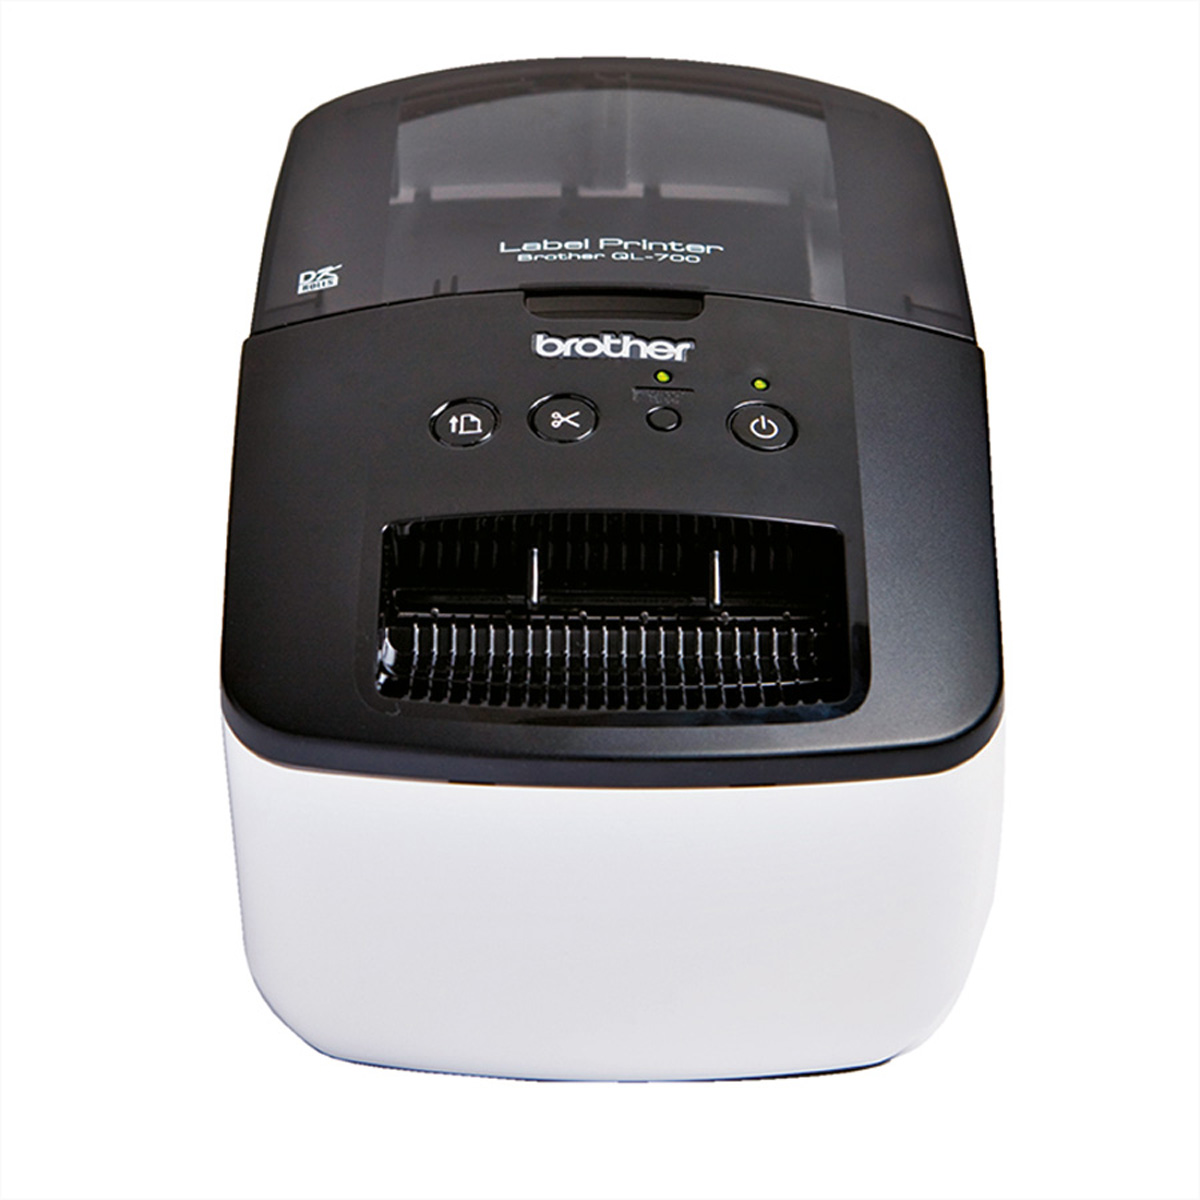 BROTHER P-Touch QL-700 Label Printer - Beschriftungsgerät, \"Plug-In and Label\"-Funktionalität